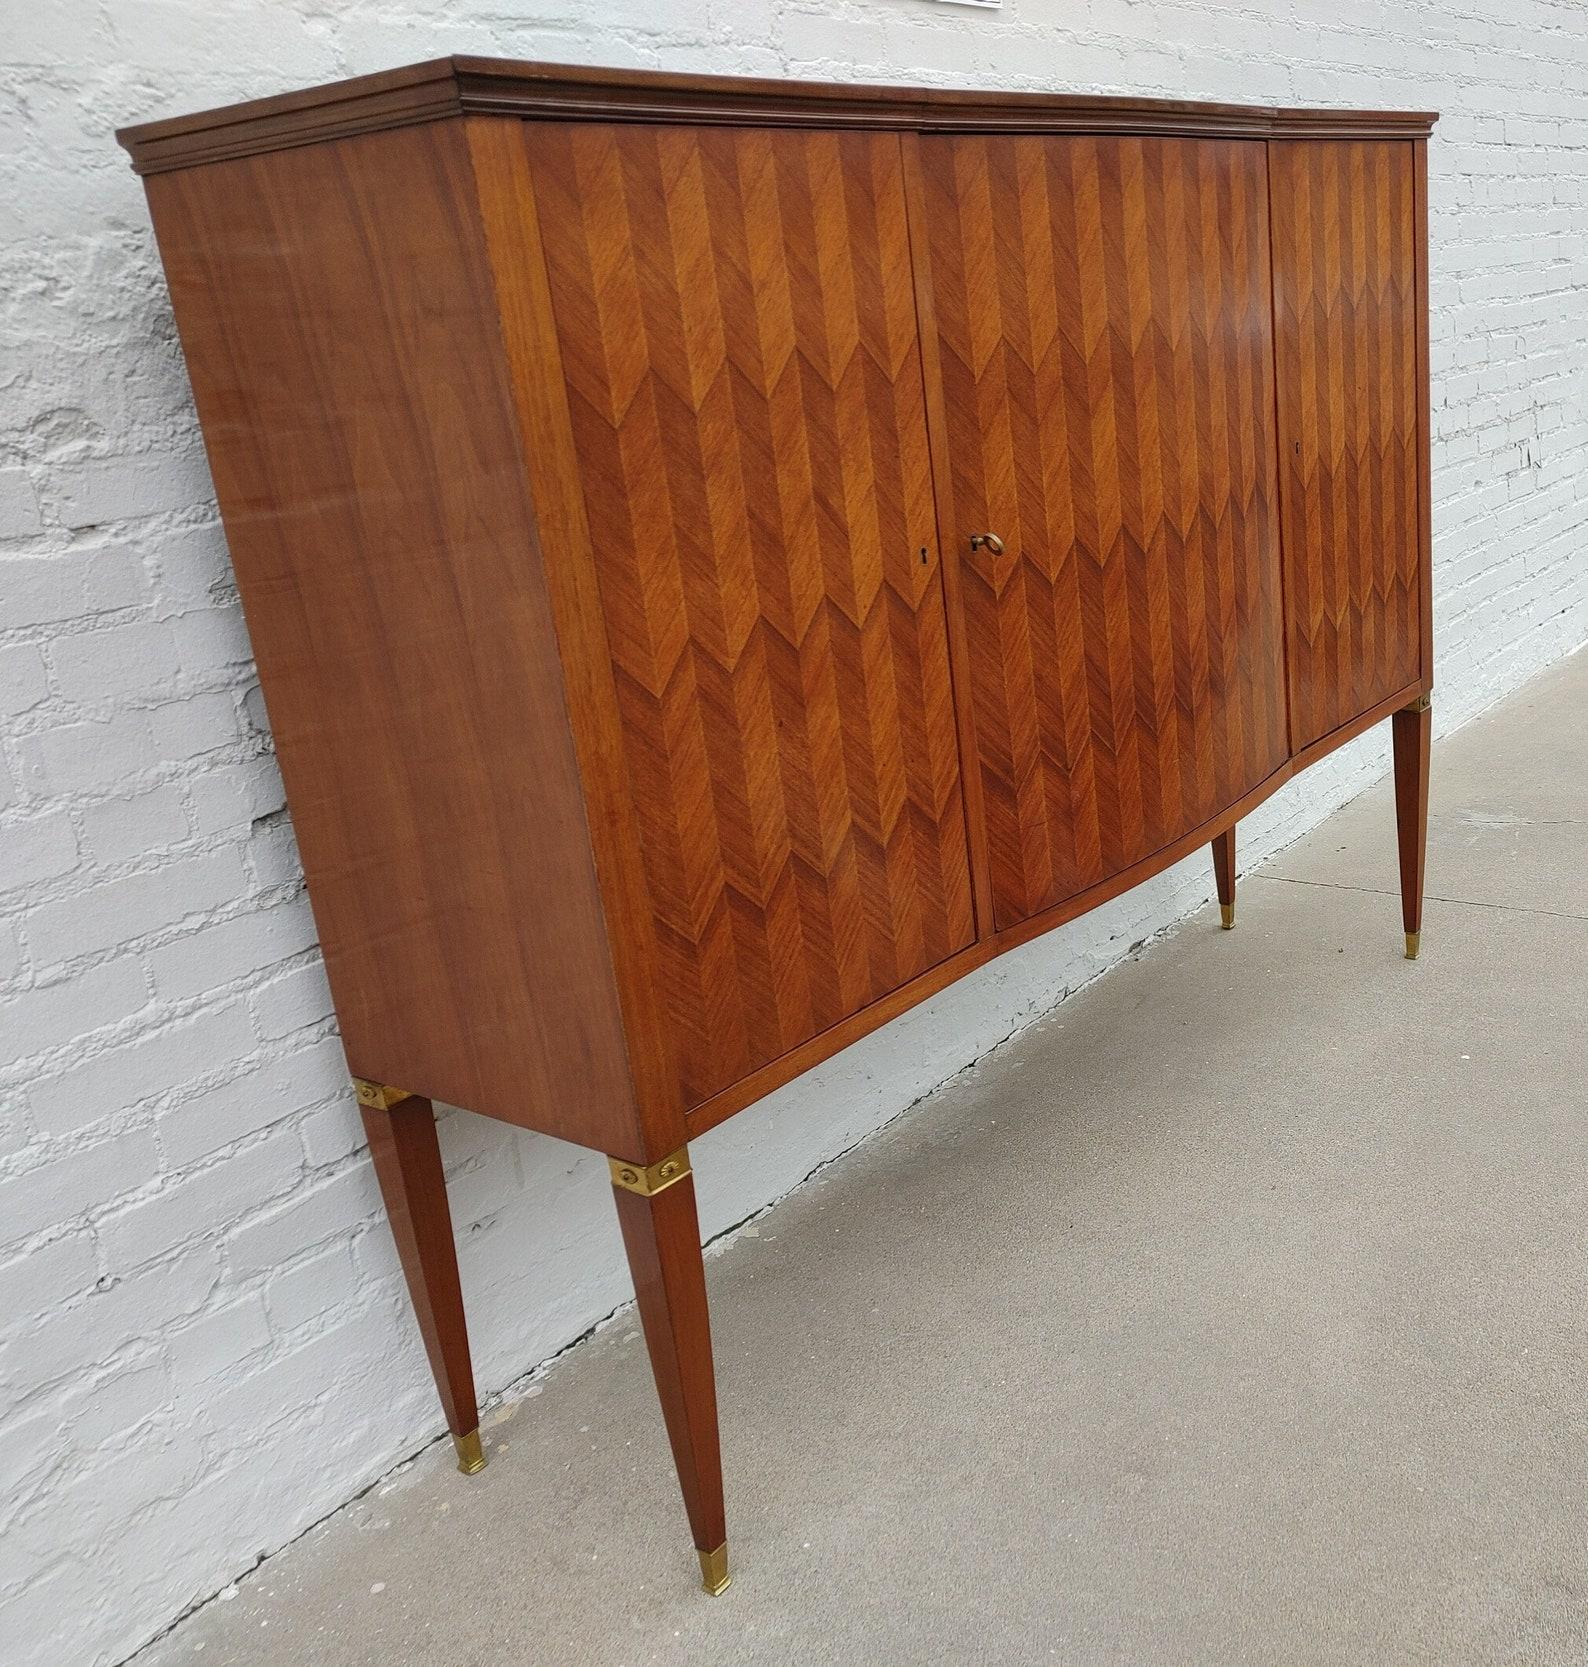 Mid Century Modern Danish Teak Side Table

Above average vintage condition and structurally sound. Has some expected slight finish wear and scratching.

Additional information:
Materials: Mahogany
Vintage from the 1950s
Dimensions: 69 W x 18  D x 52